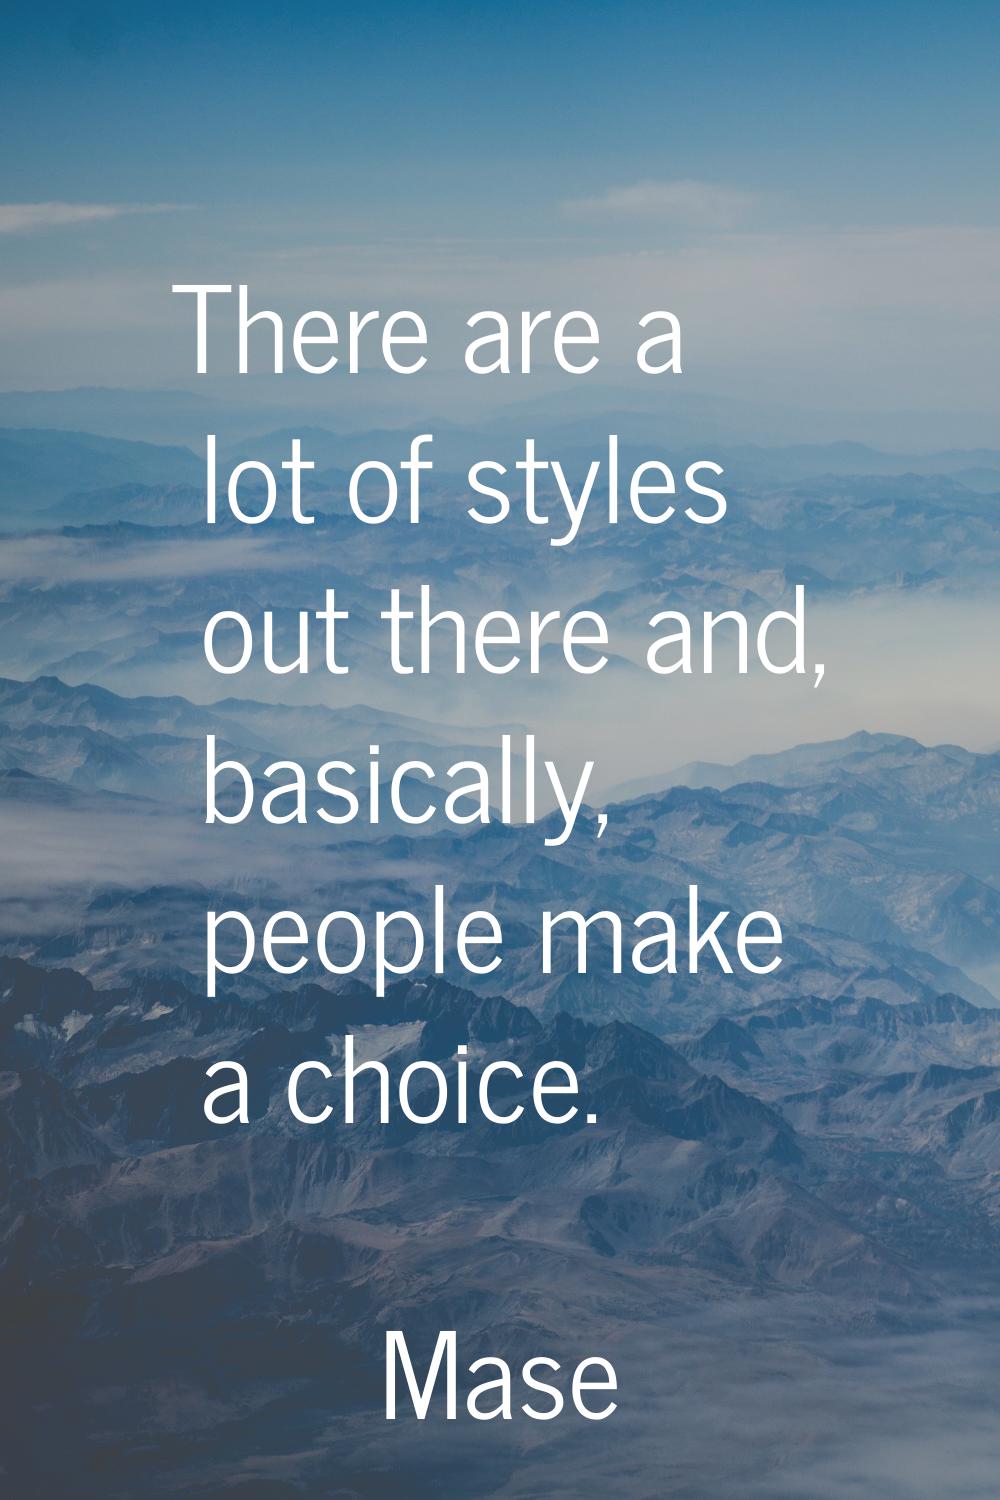 There are a lot of styles out there and, basically, people make a choice.